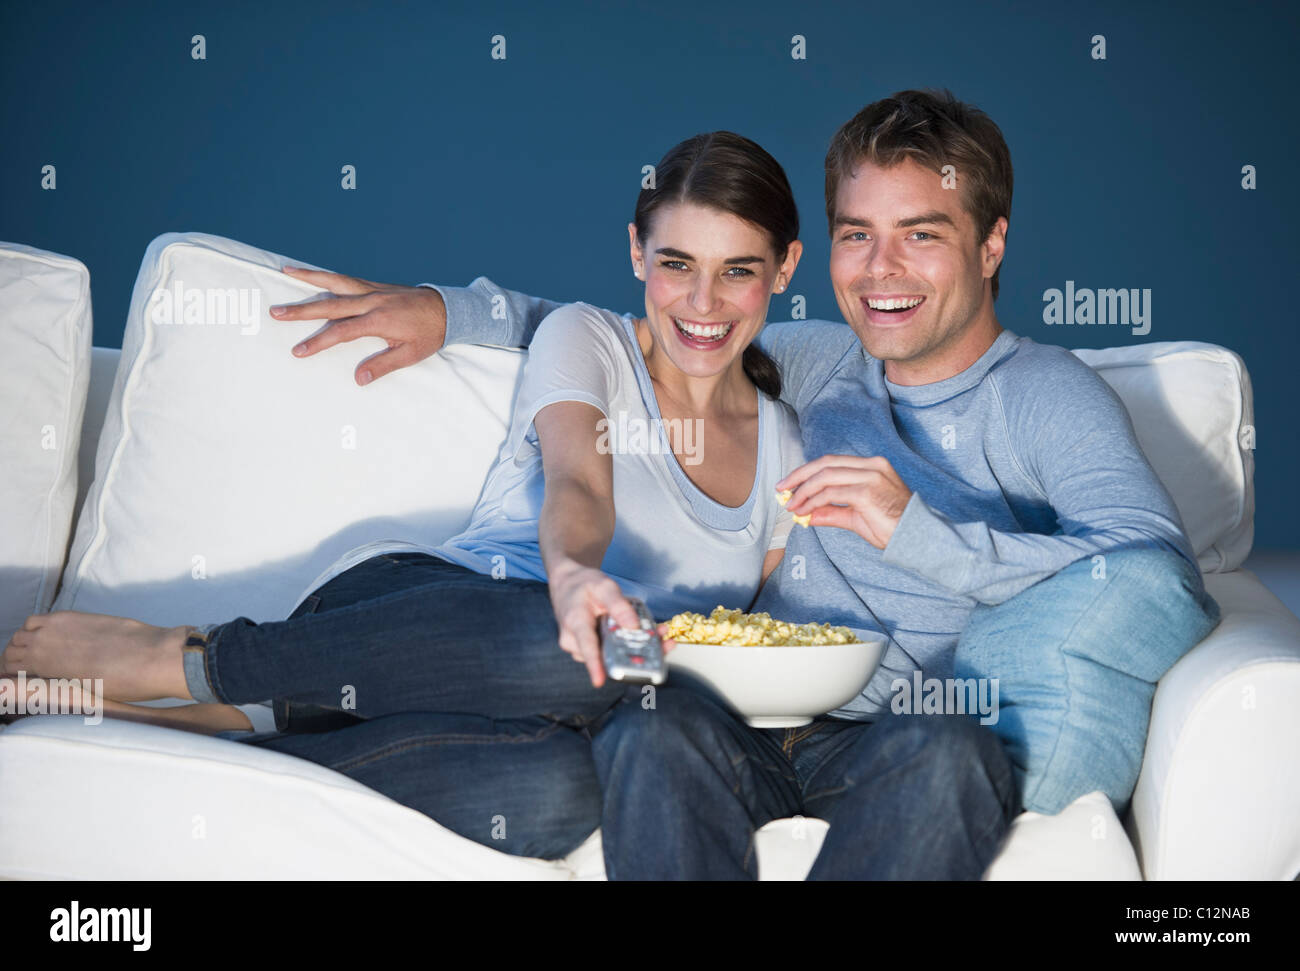 Couple sitting in front of television Banque D'Images